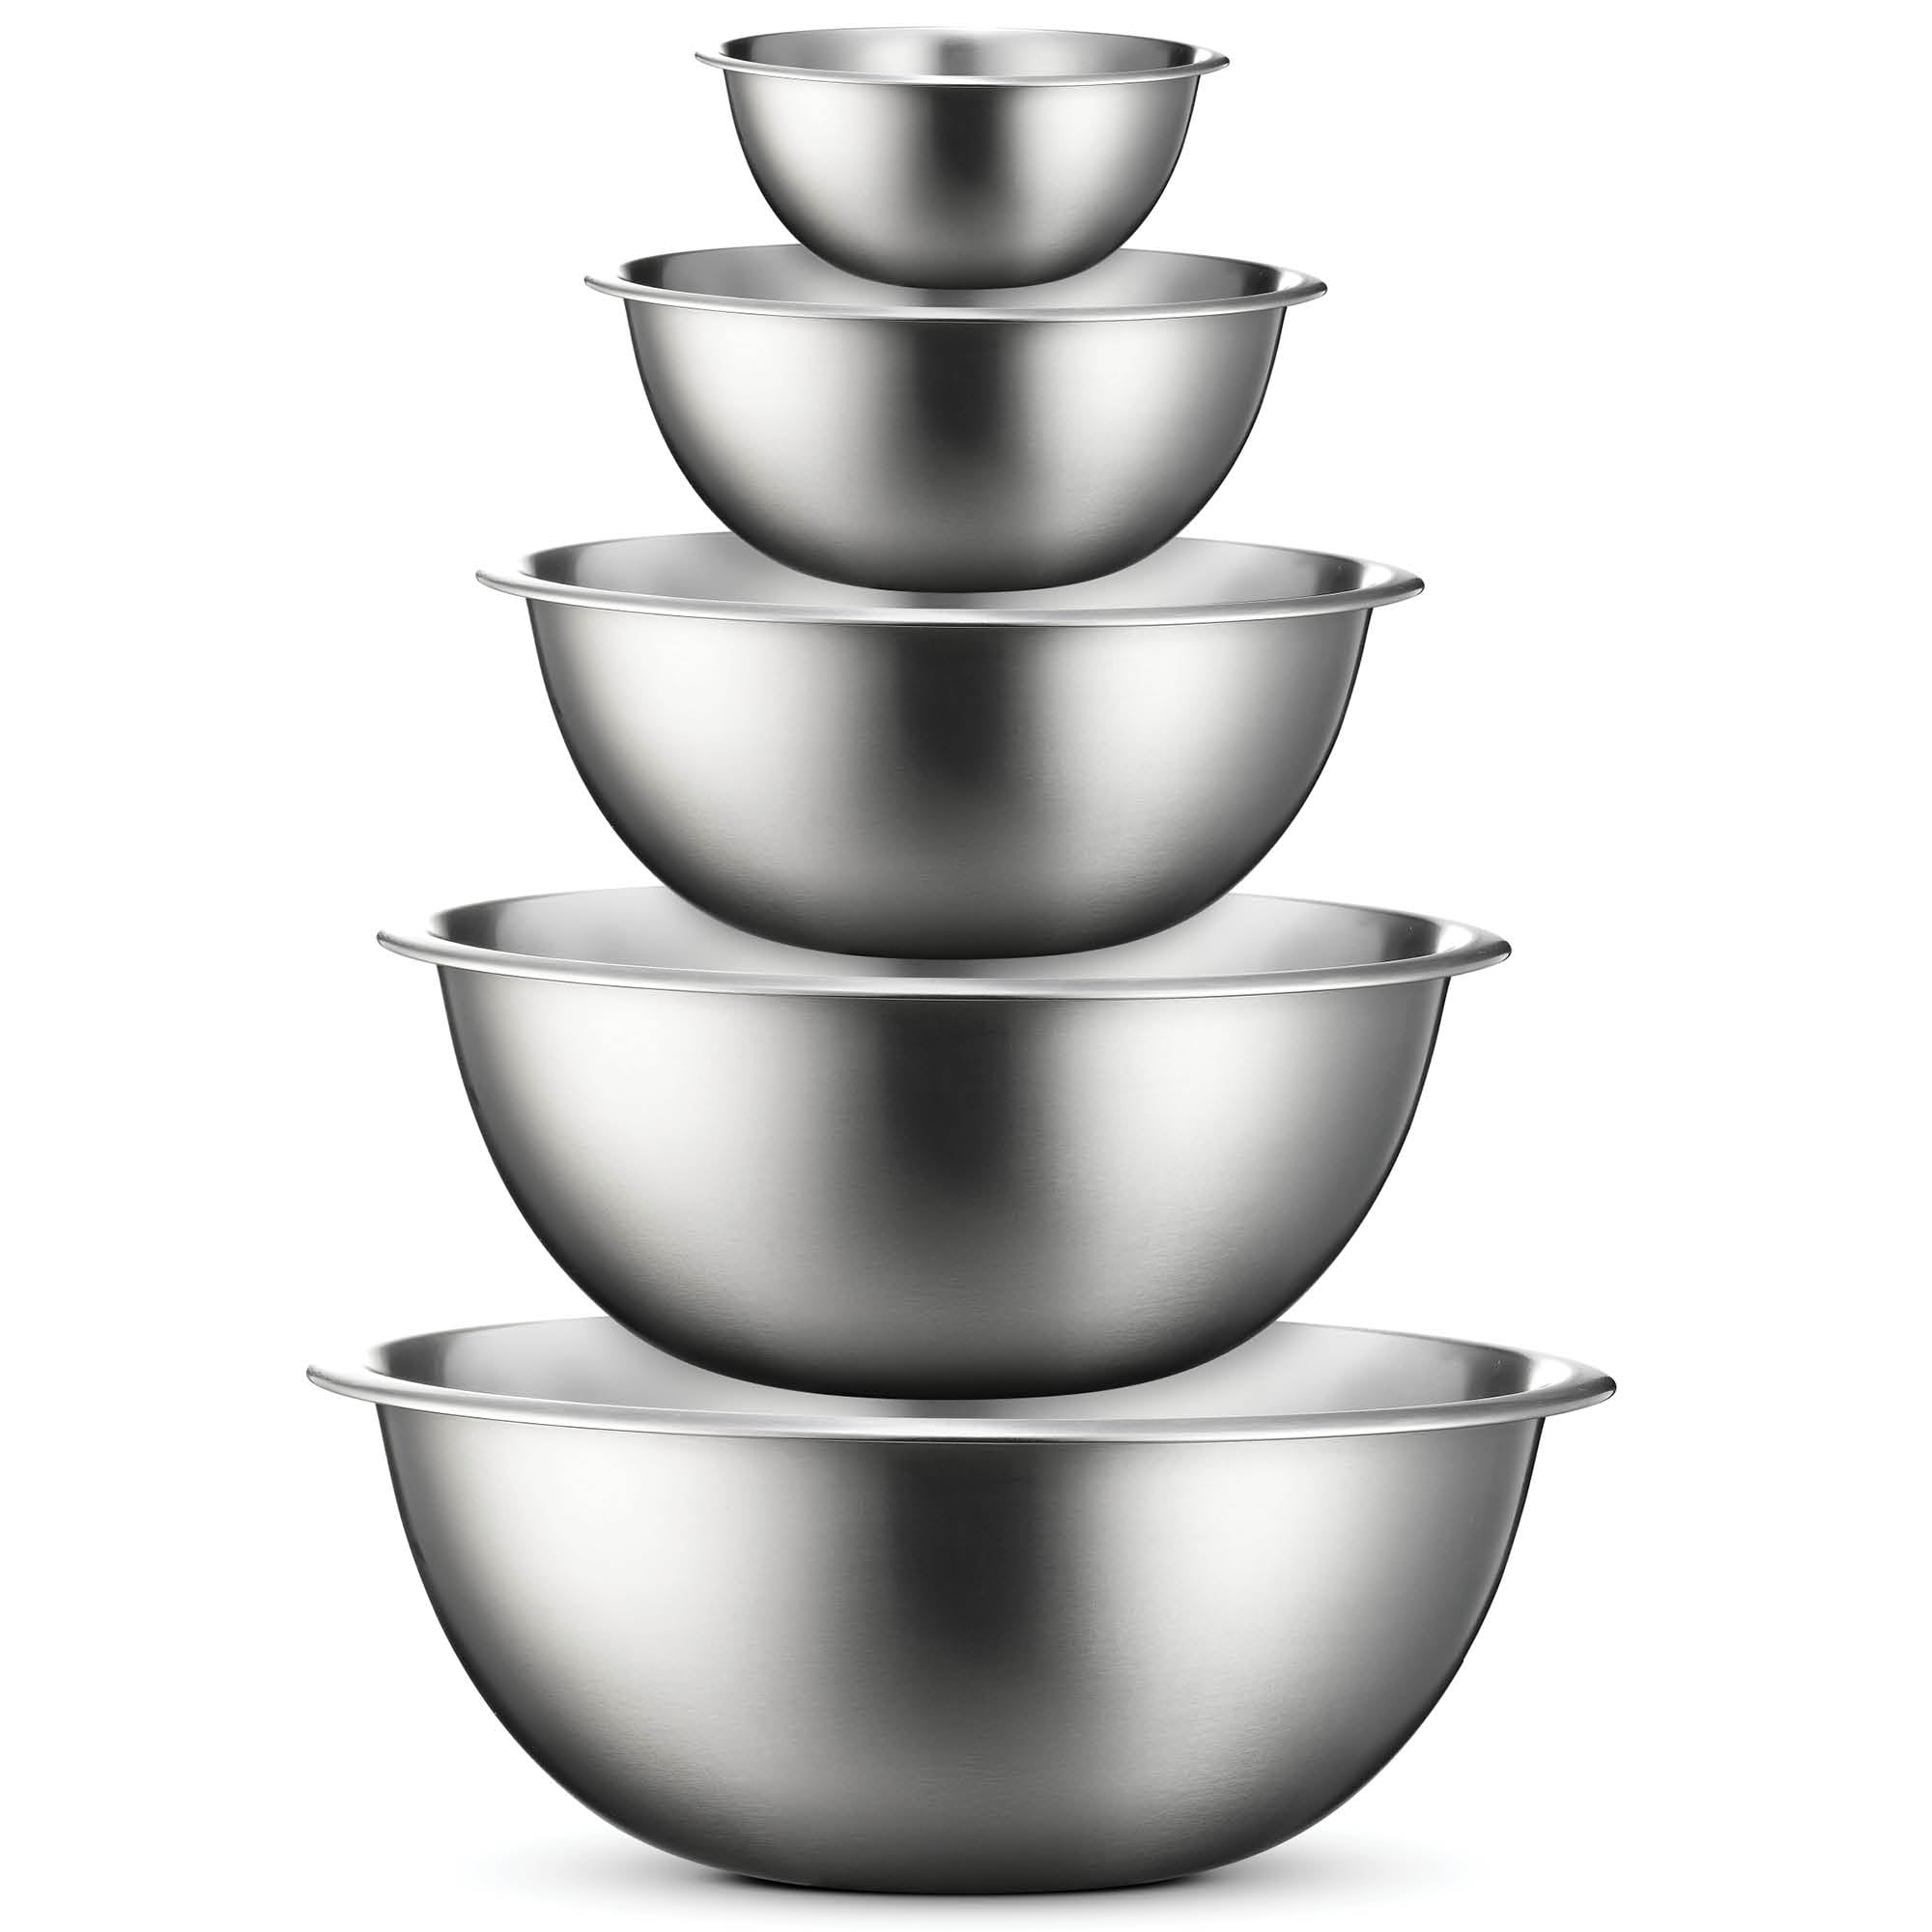 Another great find on #zulily! Pouring Chute #zulilyfinds  Kitchen aid,  Steel mixing bowls, Stainless steel mixing bowls